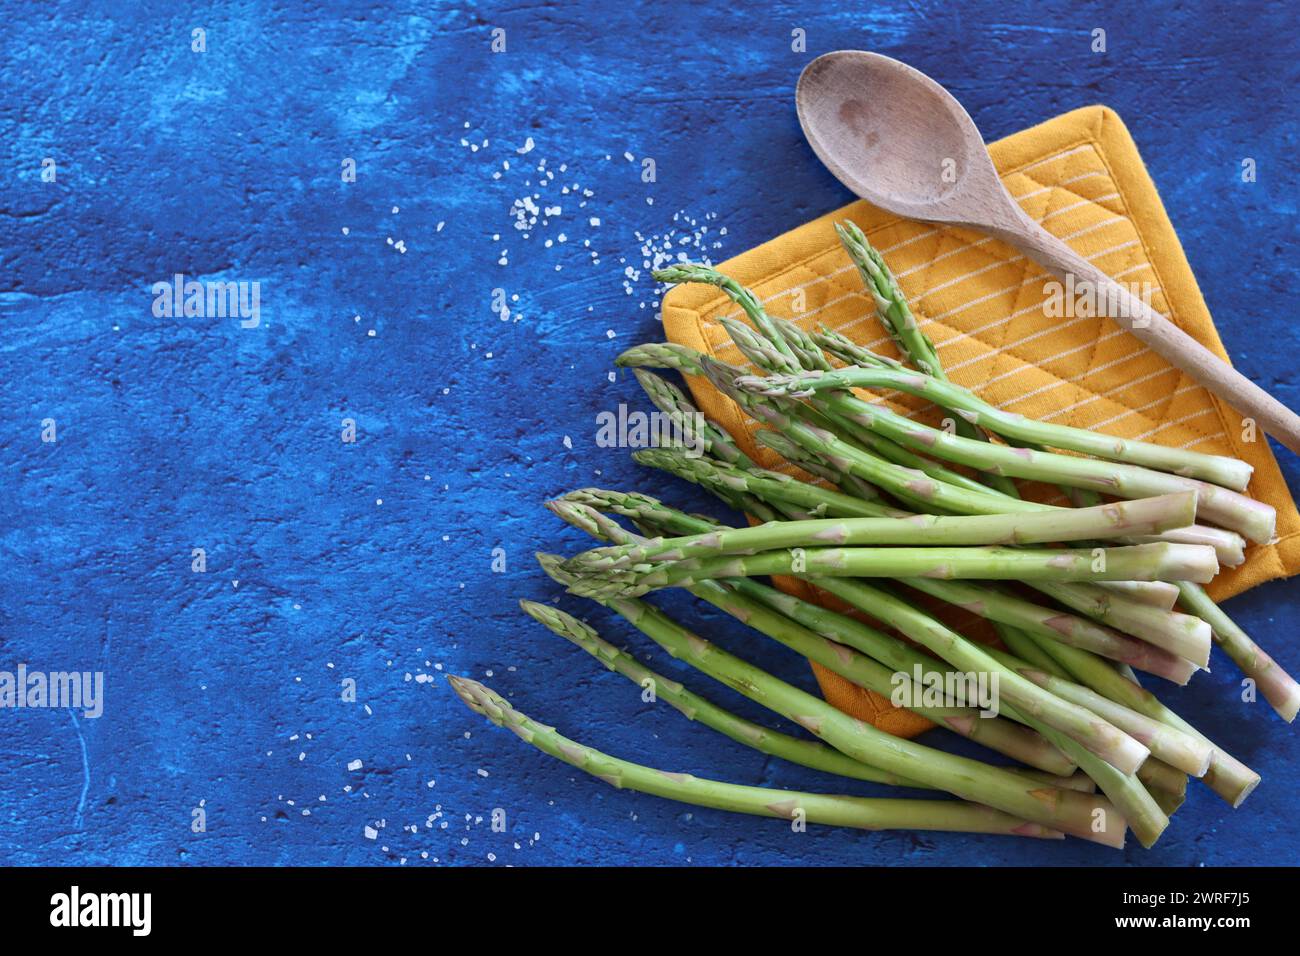 Still life photo with fresh asparagus on a table. Close up photo of fresh organic vegetables. Healthy eating balanced diet concept. Stock Photo